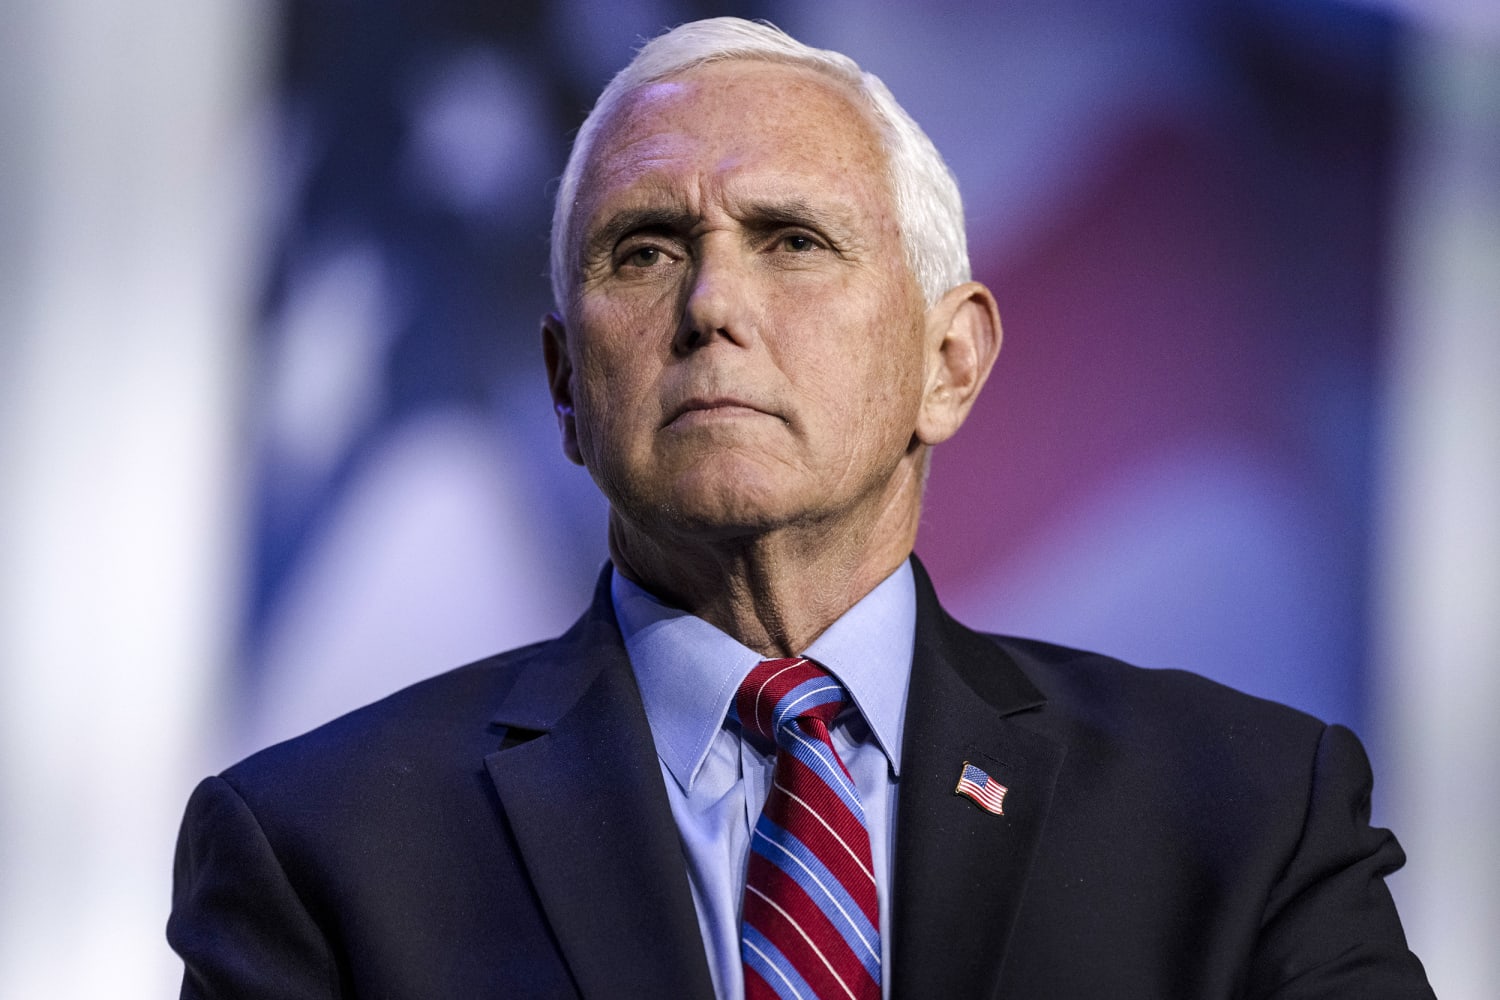 Jan. 6 committee indicates it will ask Pence to appear this month